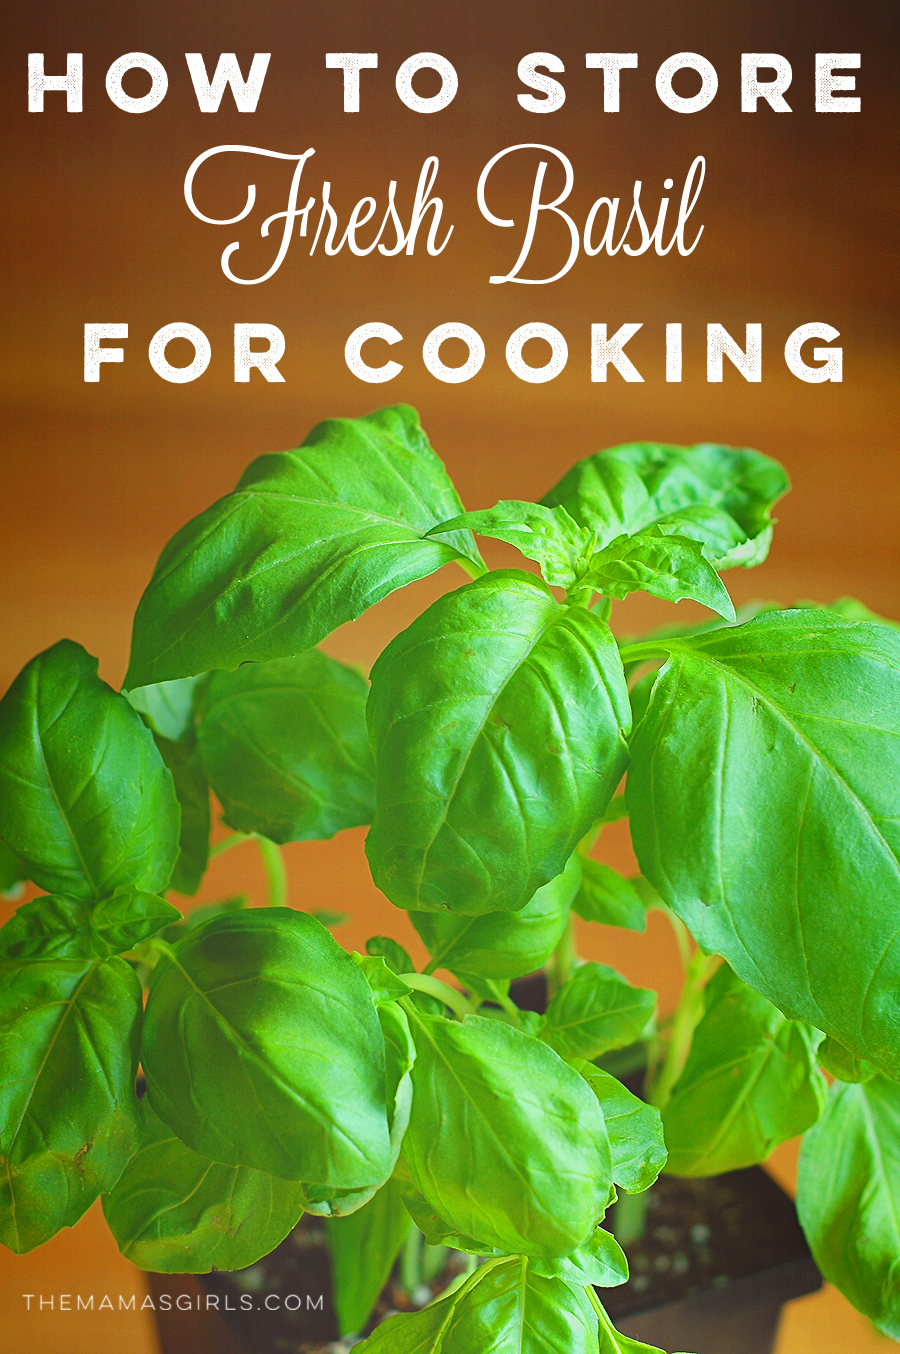 How to store fresh basil for cooking